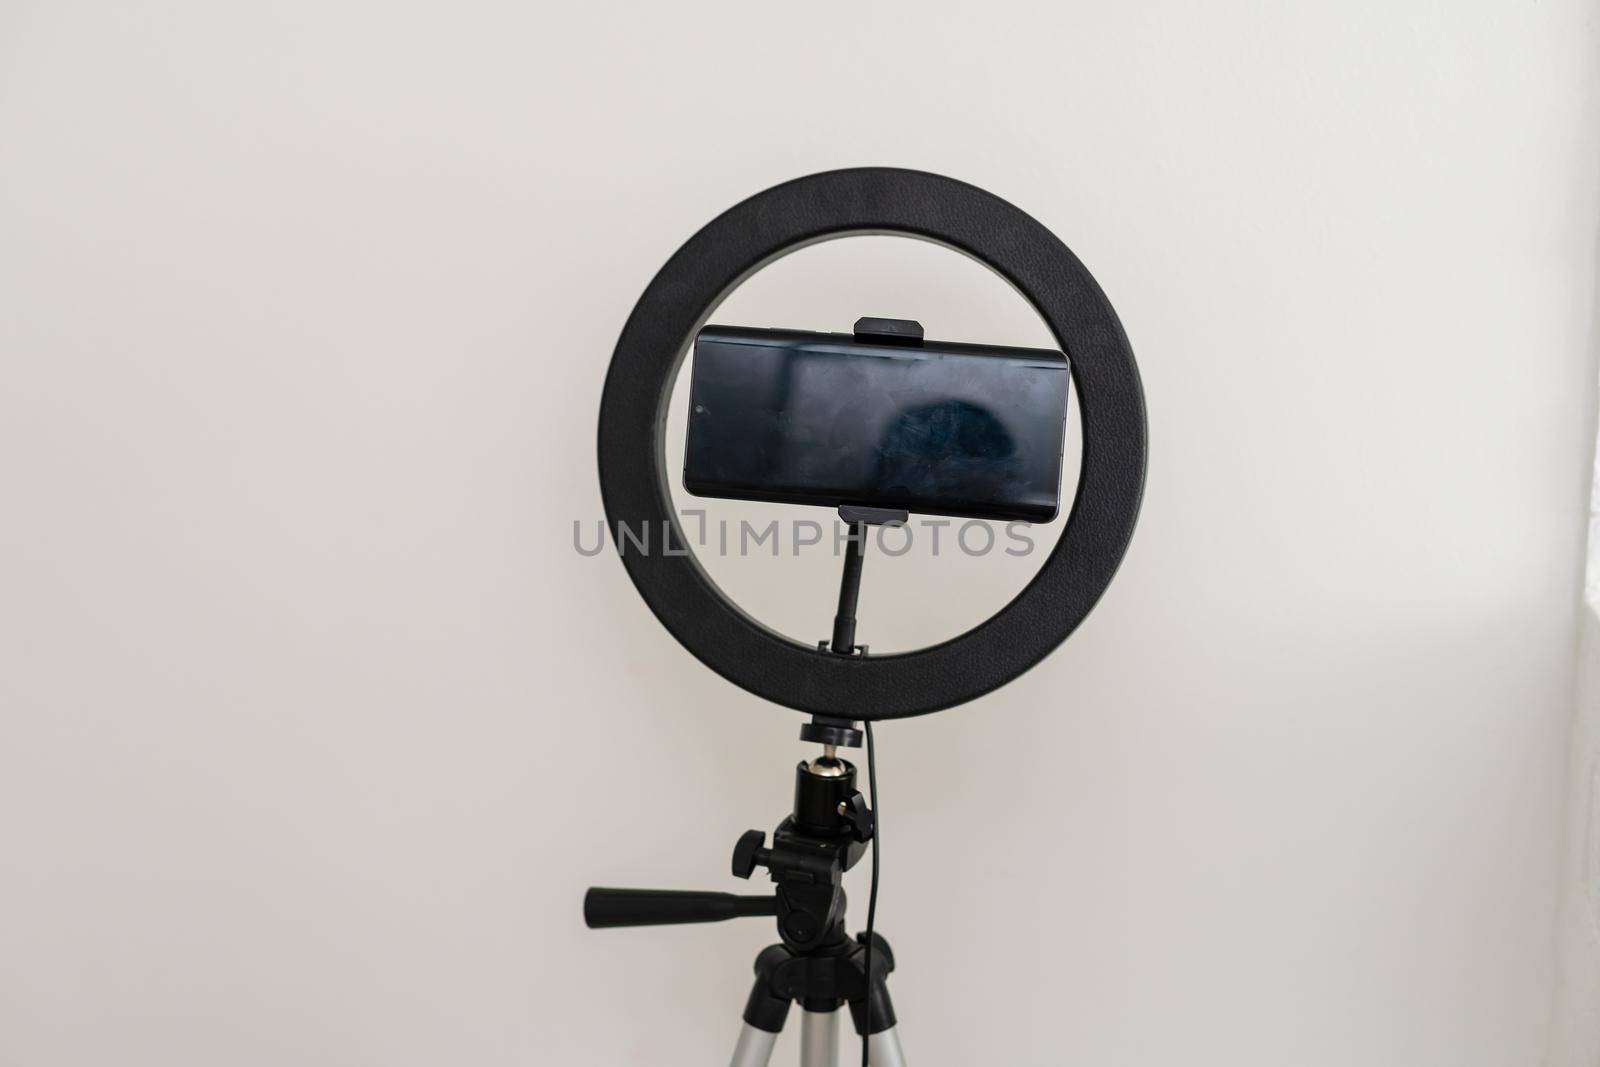 Modern circular neon led lamp for make-up artist or photographers on gray concrete background.